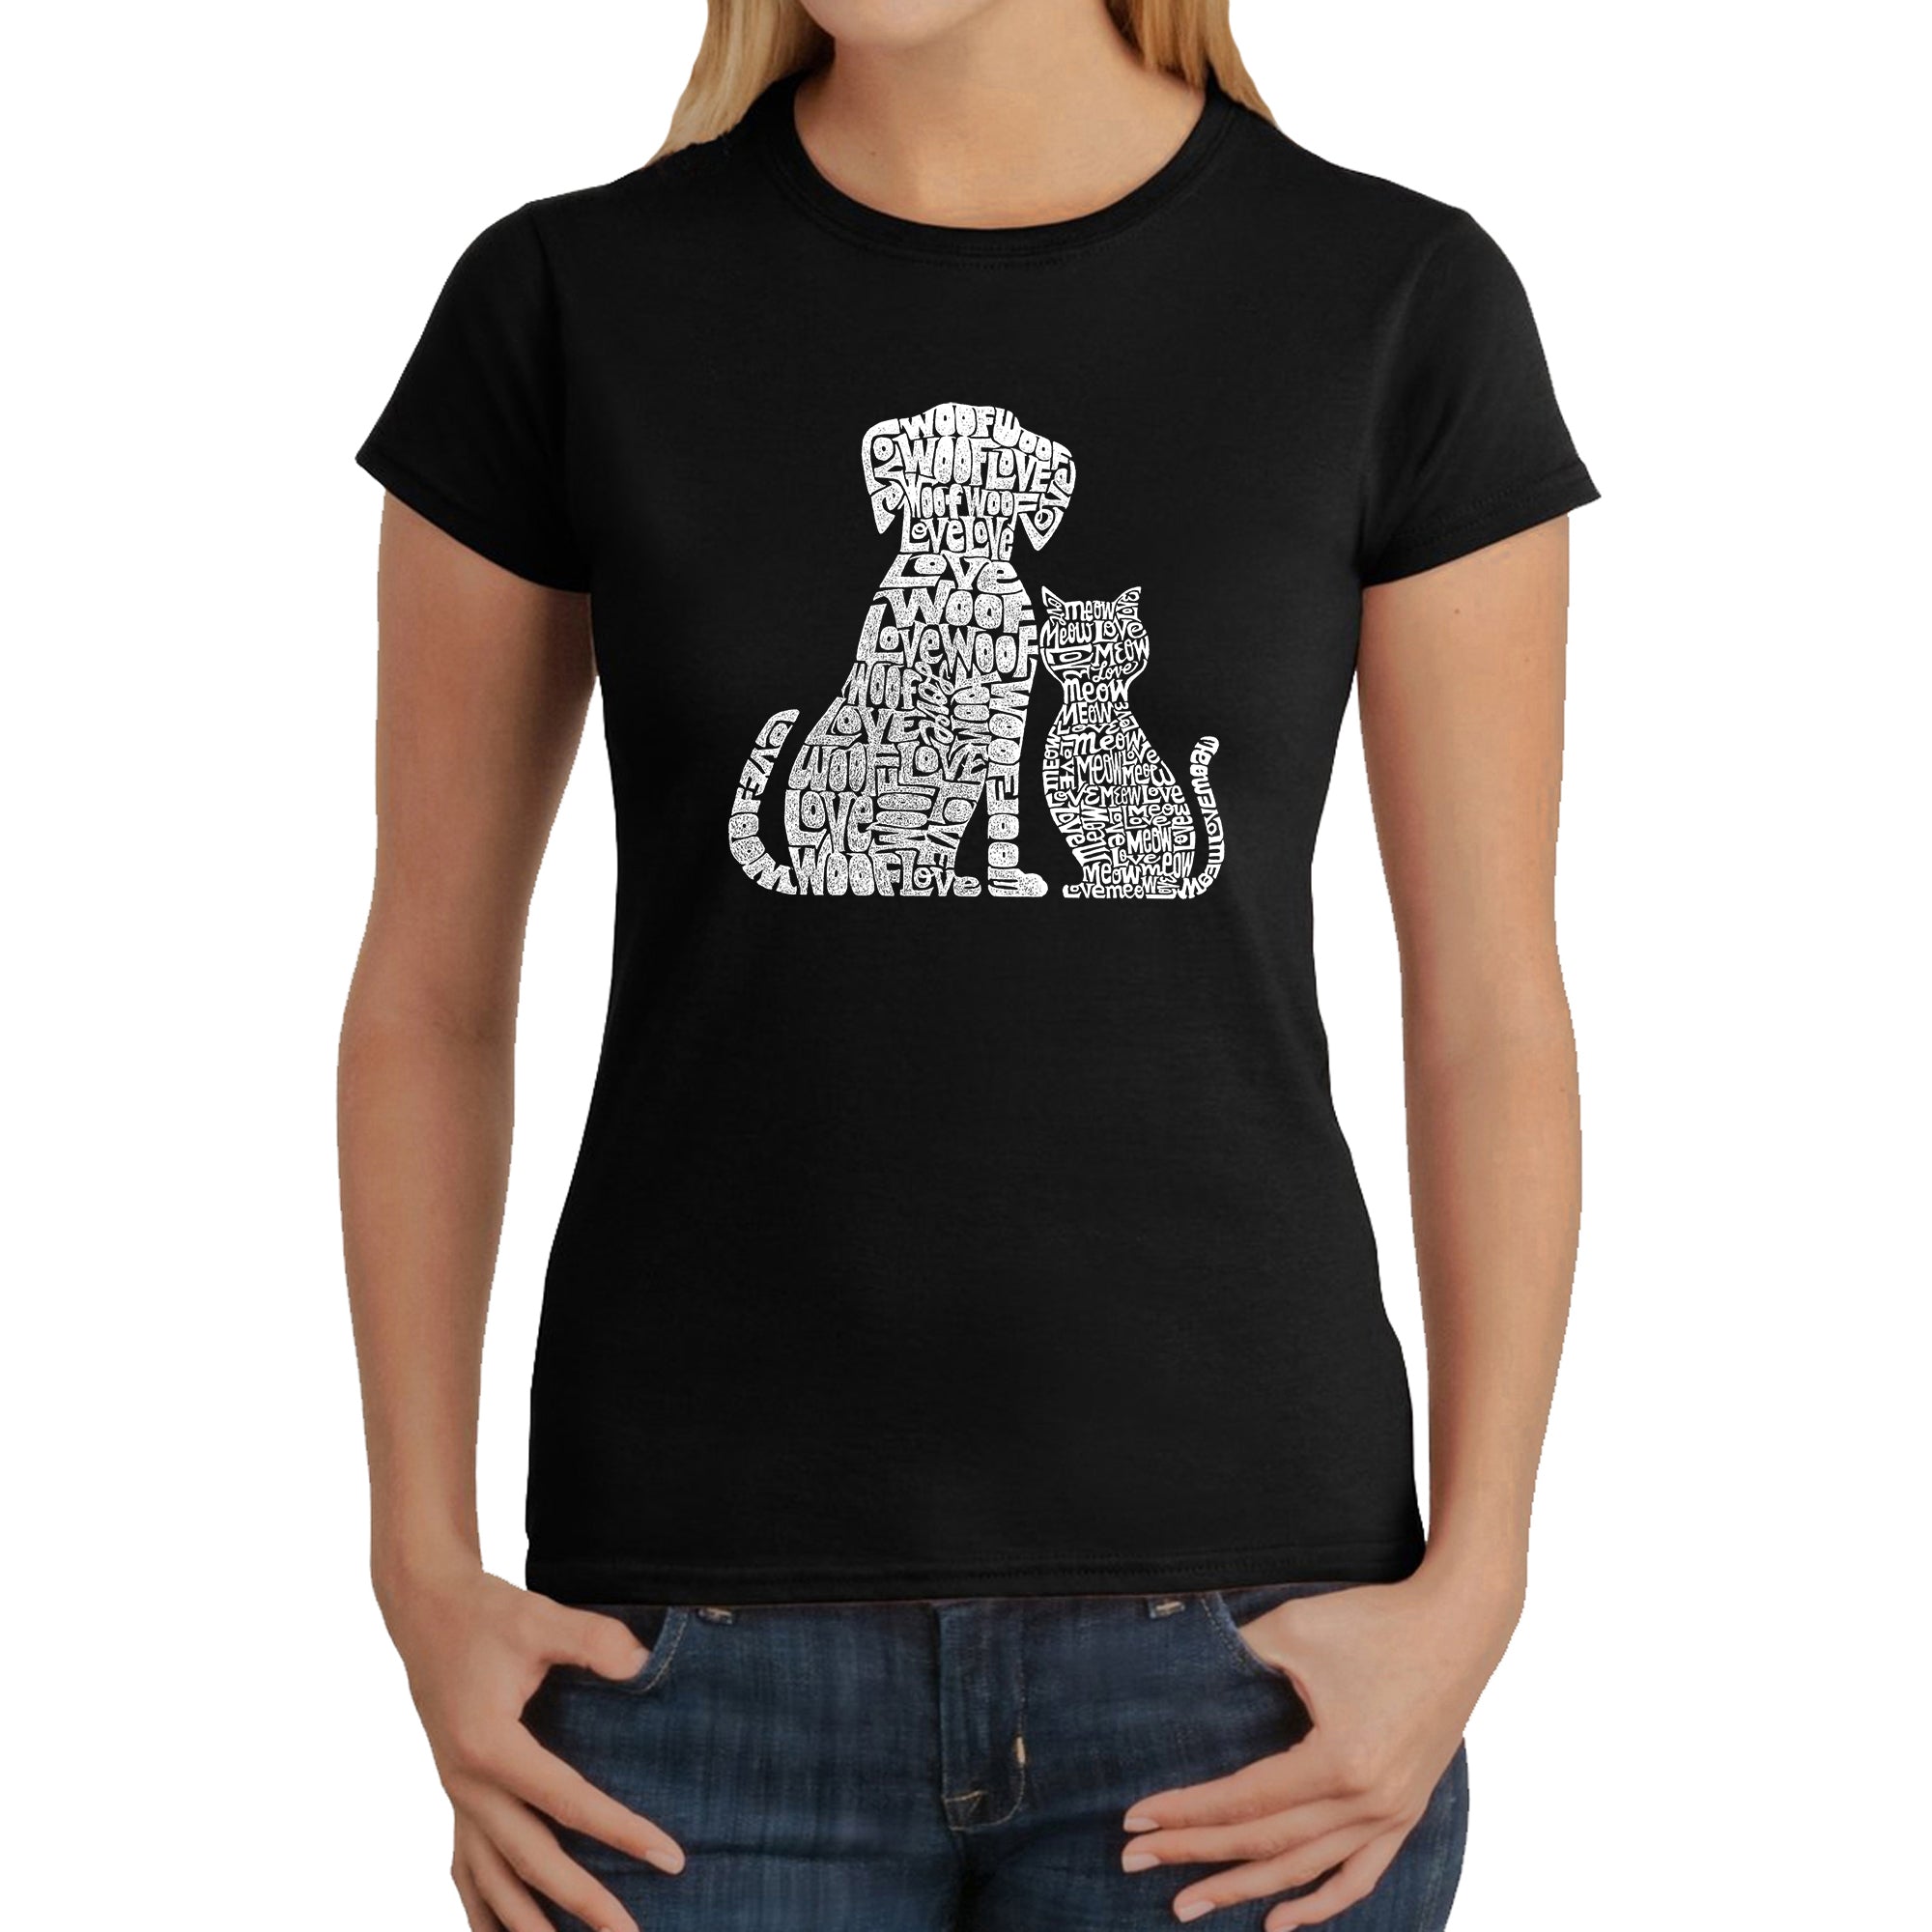 Dogs And Cats - Women's Word Art T-Shirt - Pink - XS